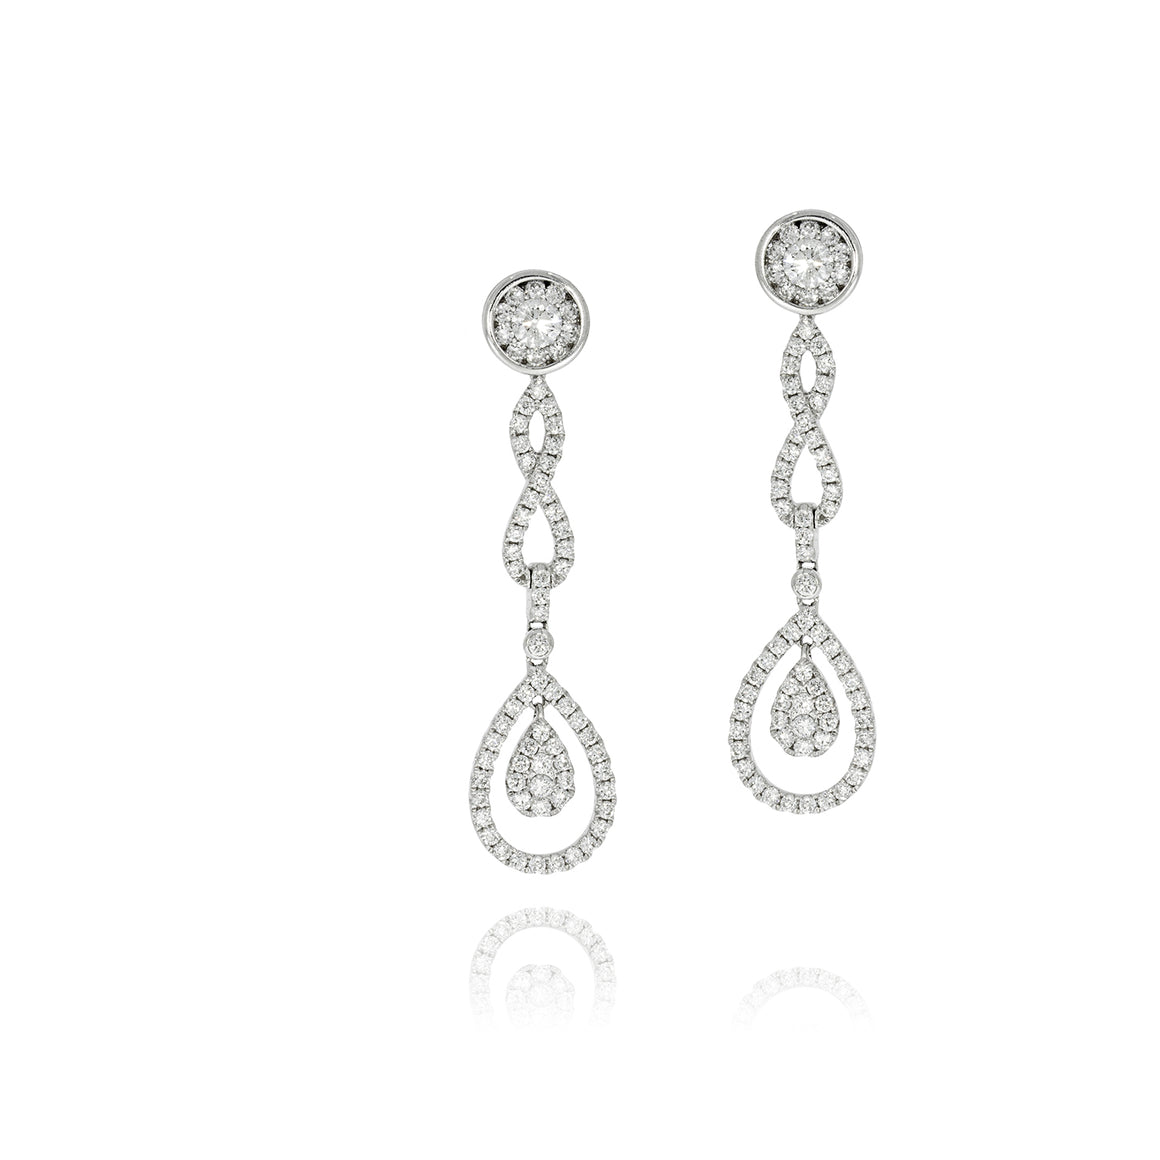 Drop Earrings set with total of 1.83 Round diamonds White gold, Flower shape.